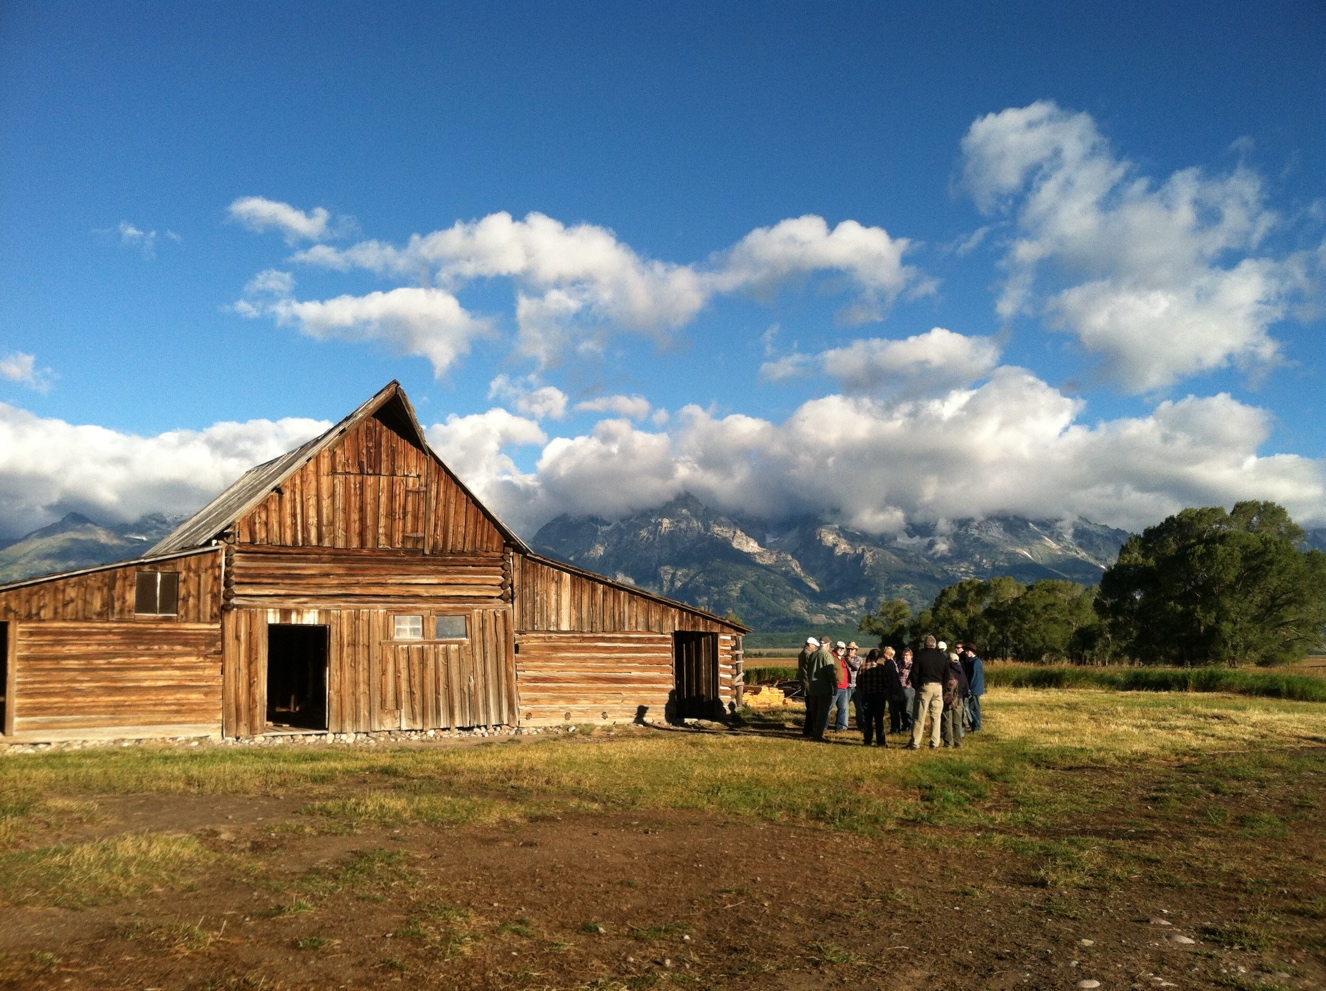 Volunteers gather at the historic T.A. Moulton Barn in Grand Teton National Park